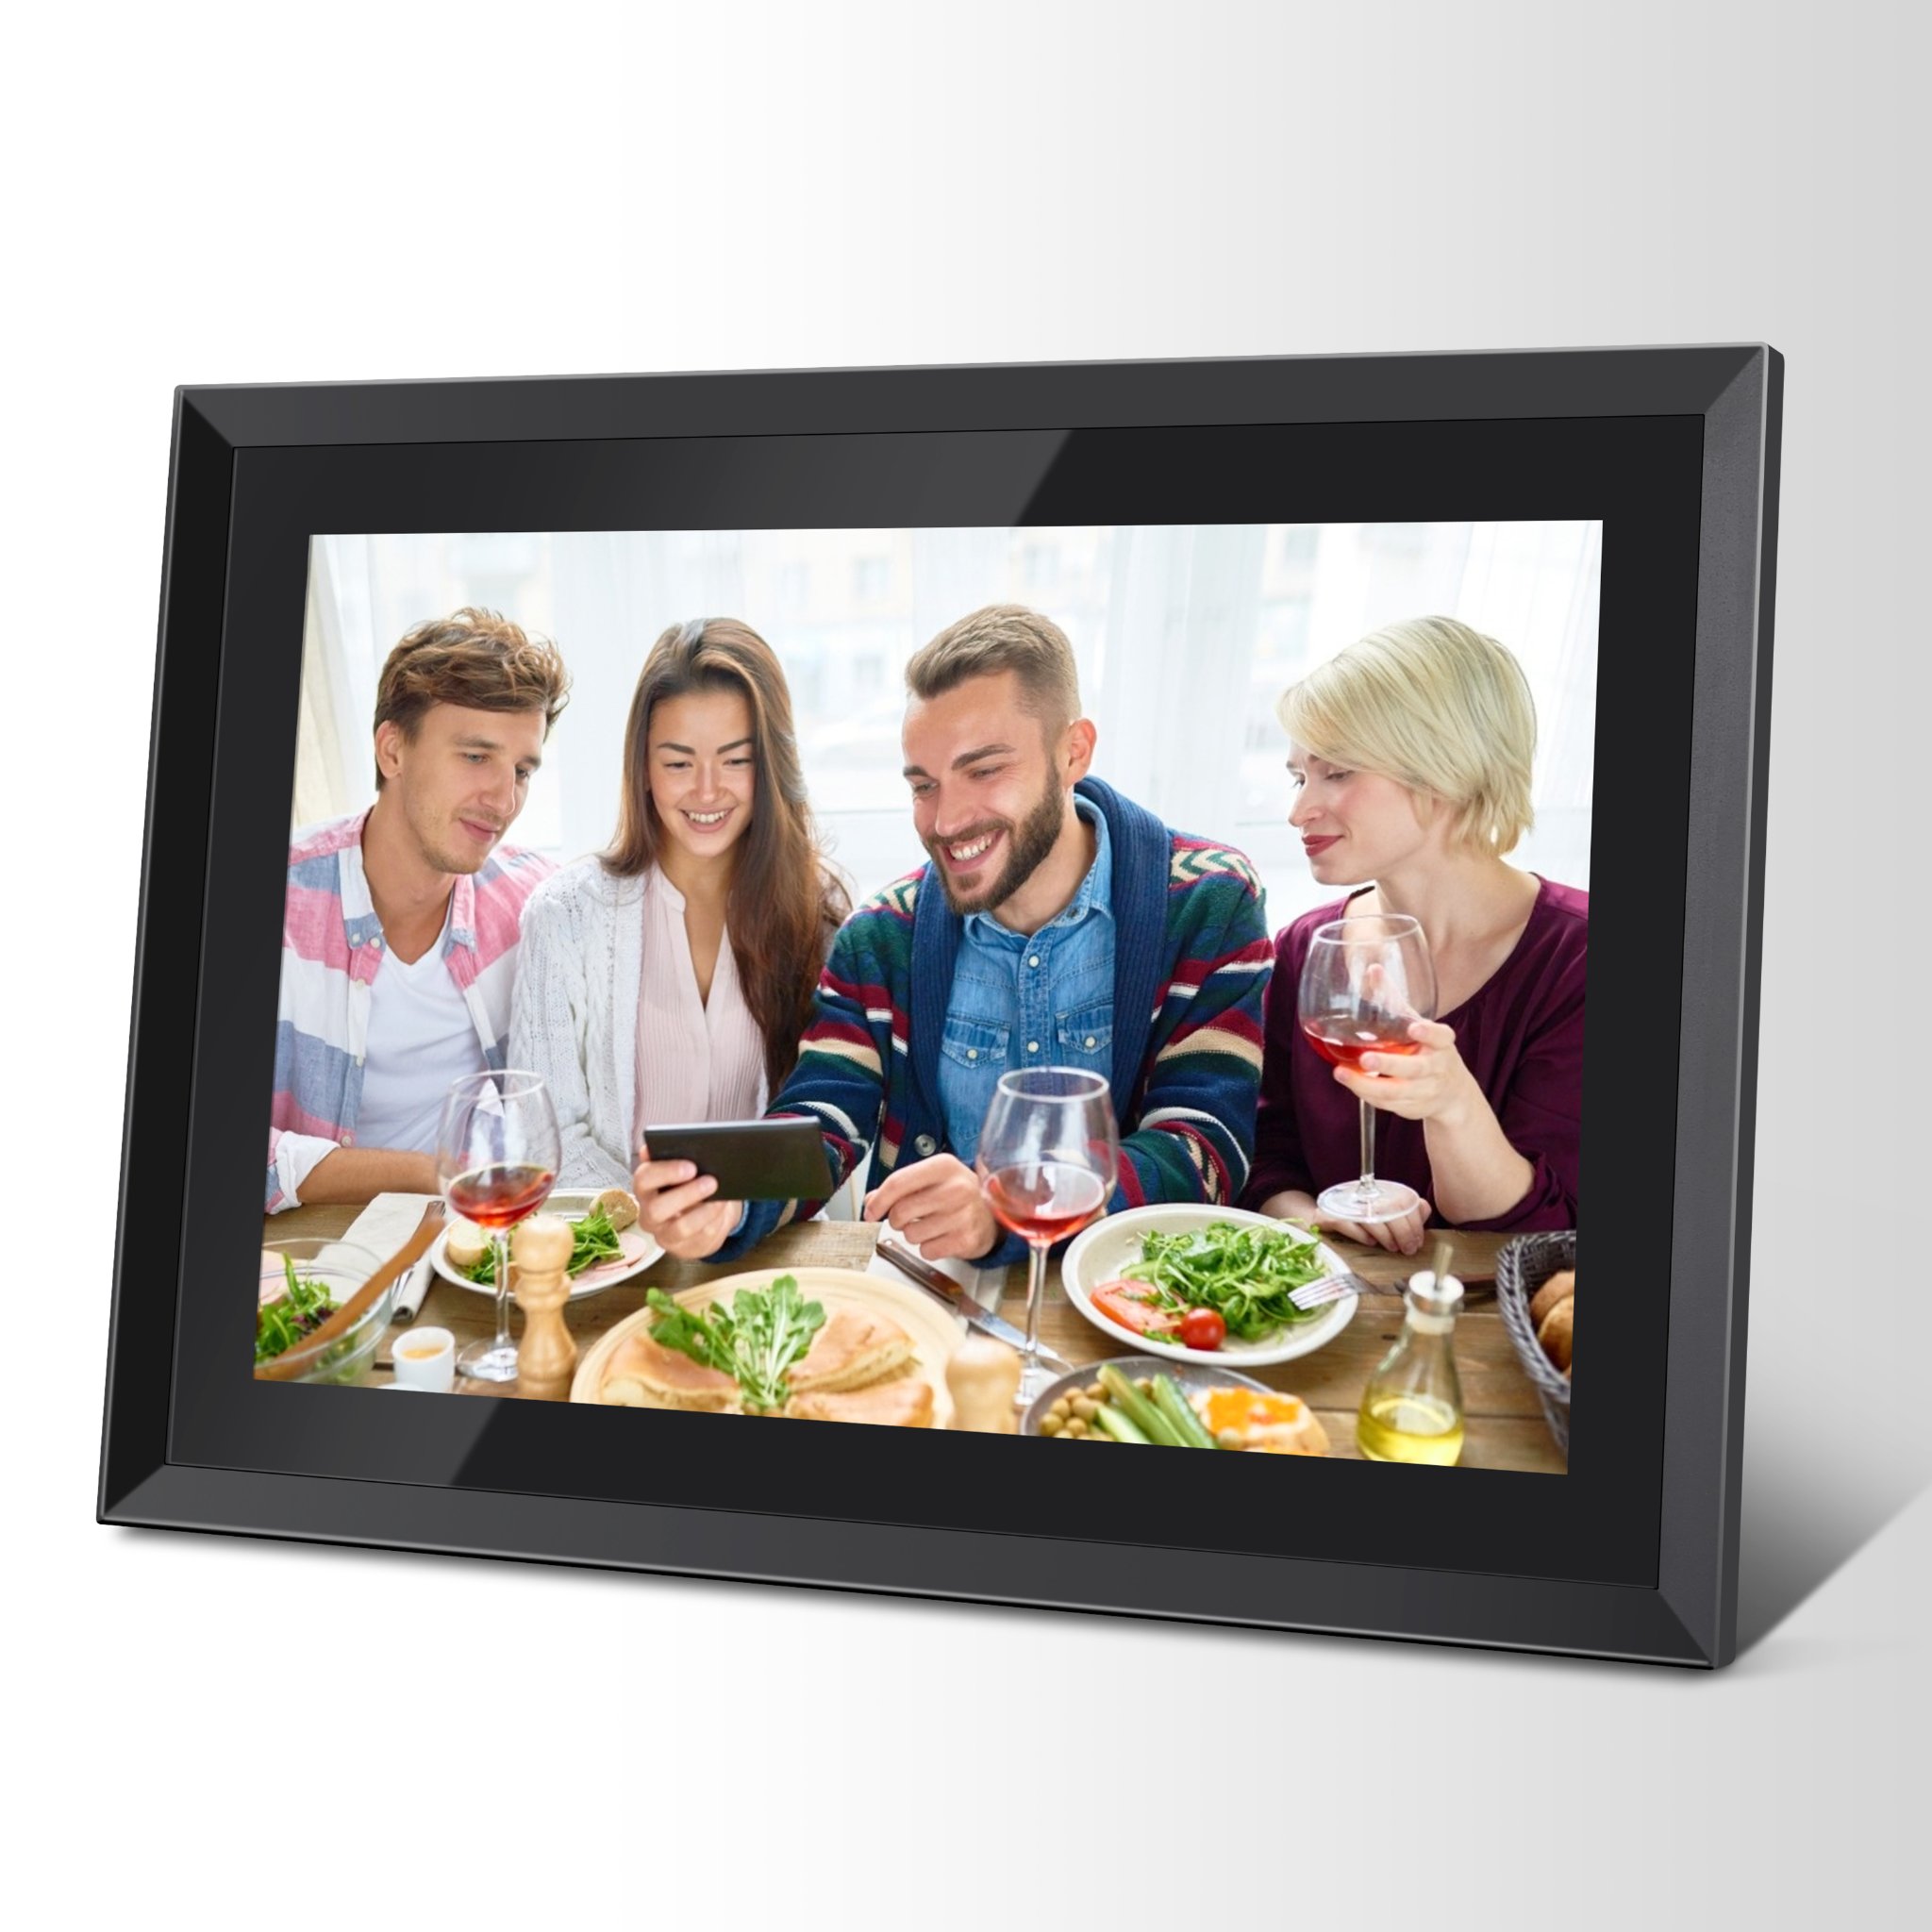 FeelCare Wifi Digital Picture Frame